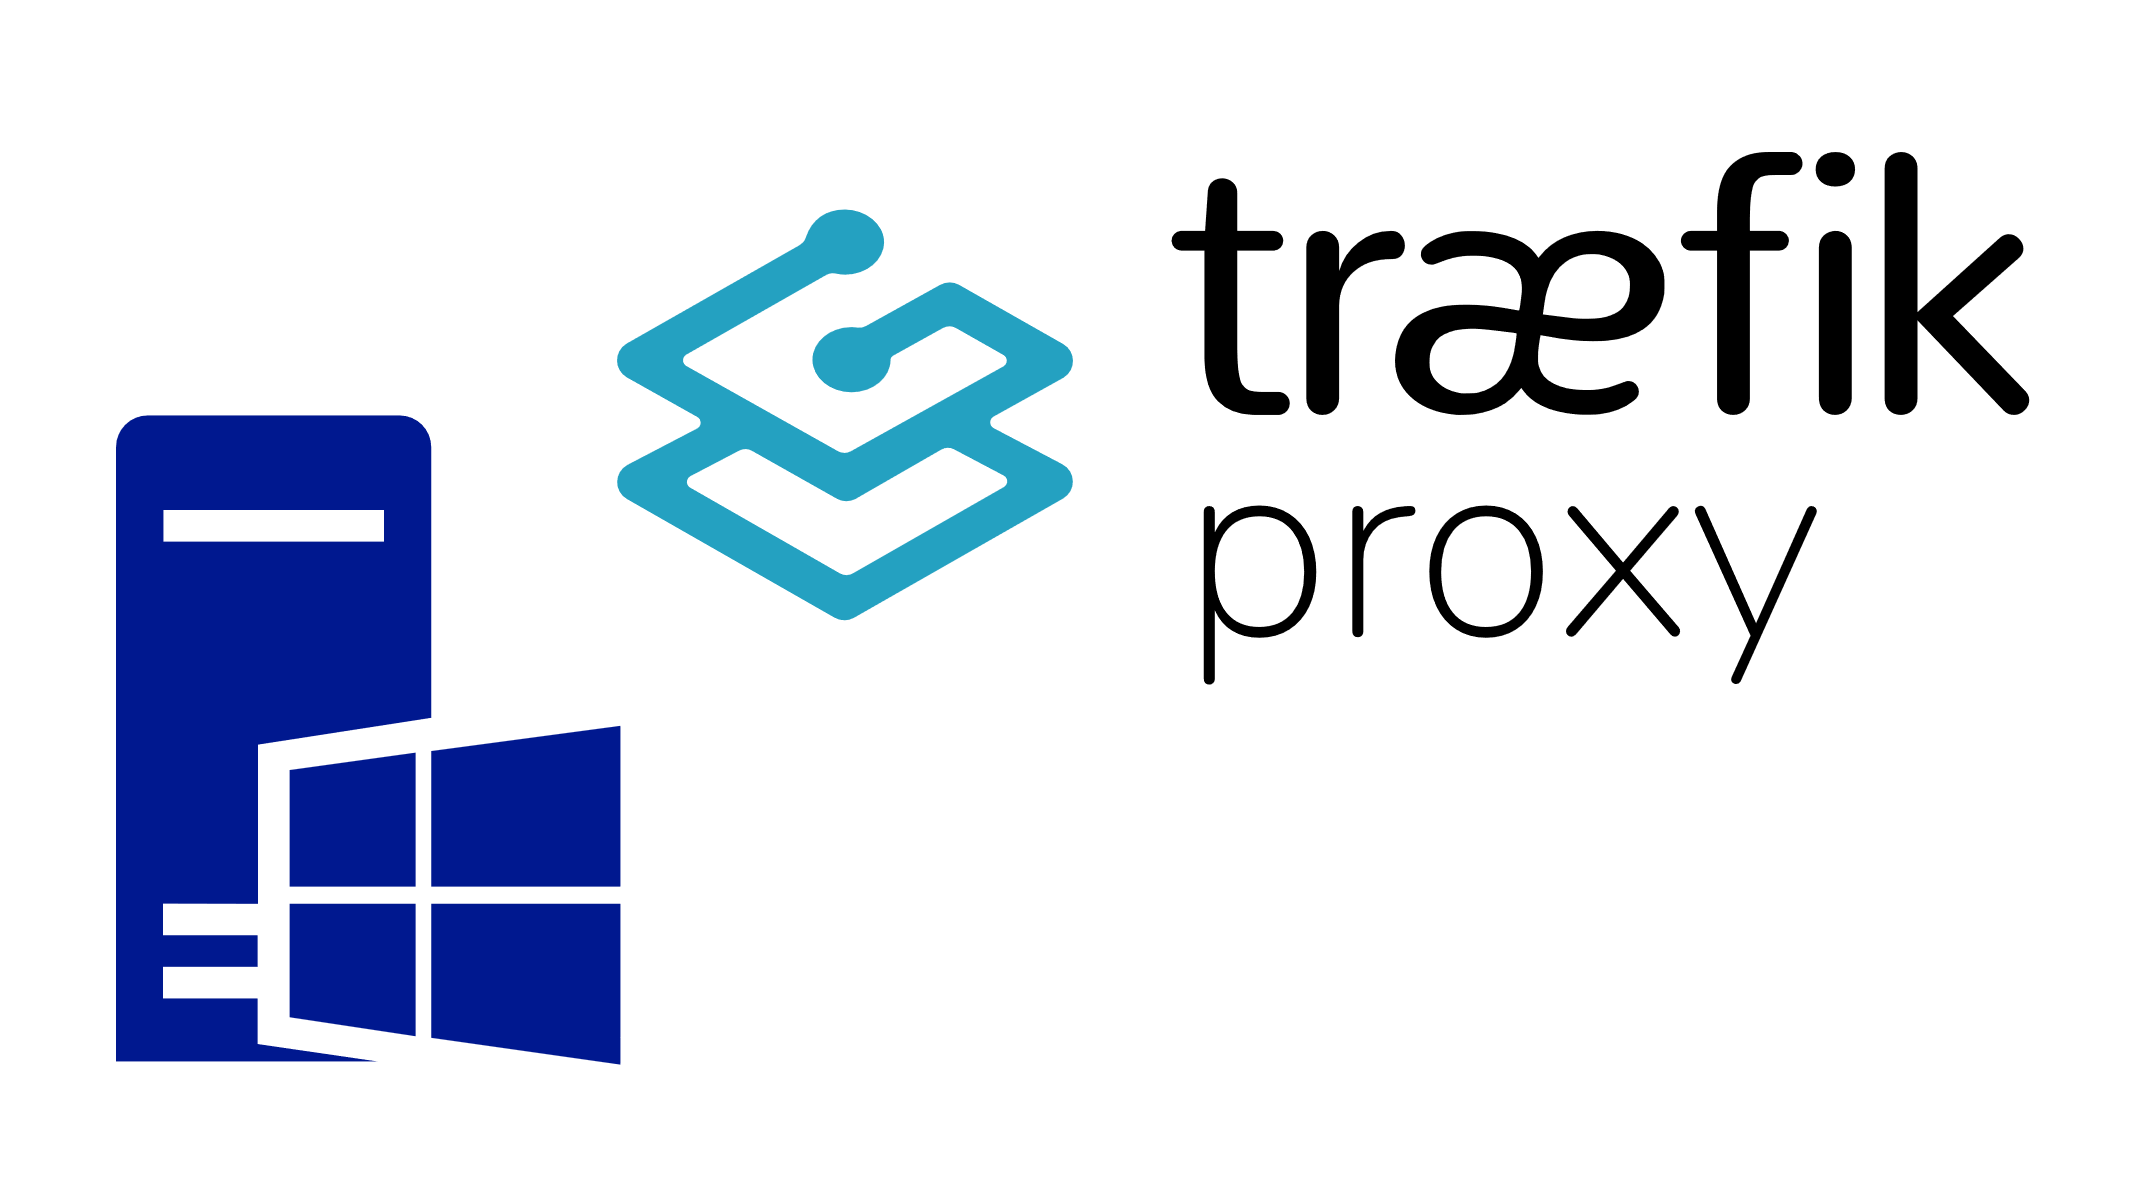 Running Traefik in a container on a modern Windows Server version